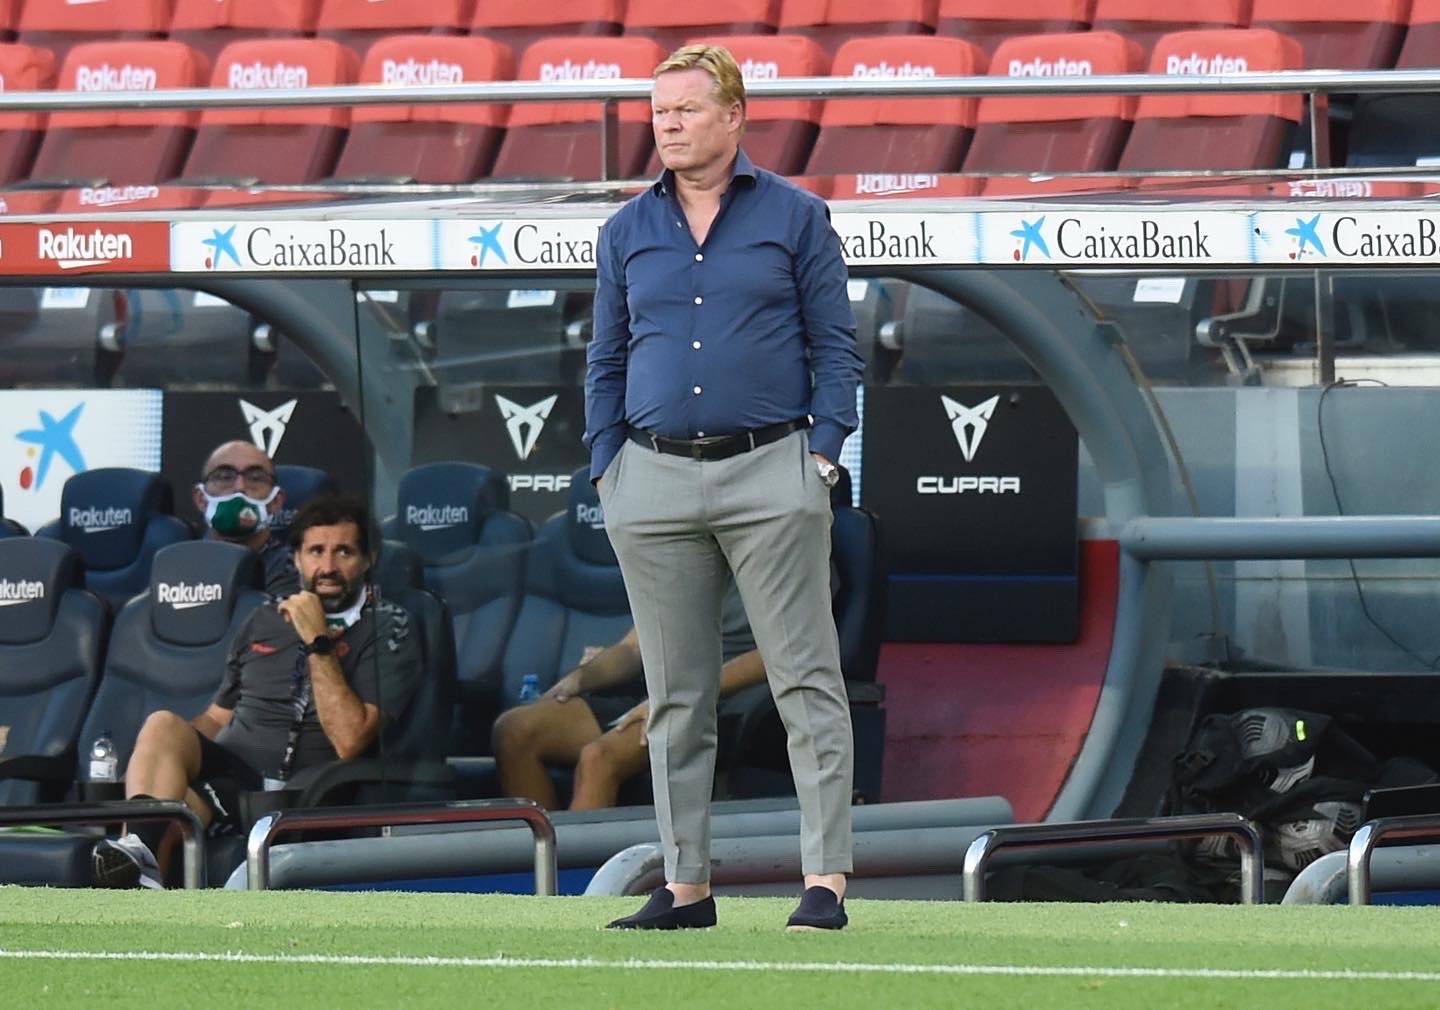 Loss to Cadiz is huge step backwards and difficult to explain, asserts Ronald Koeman